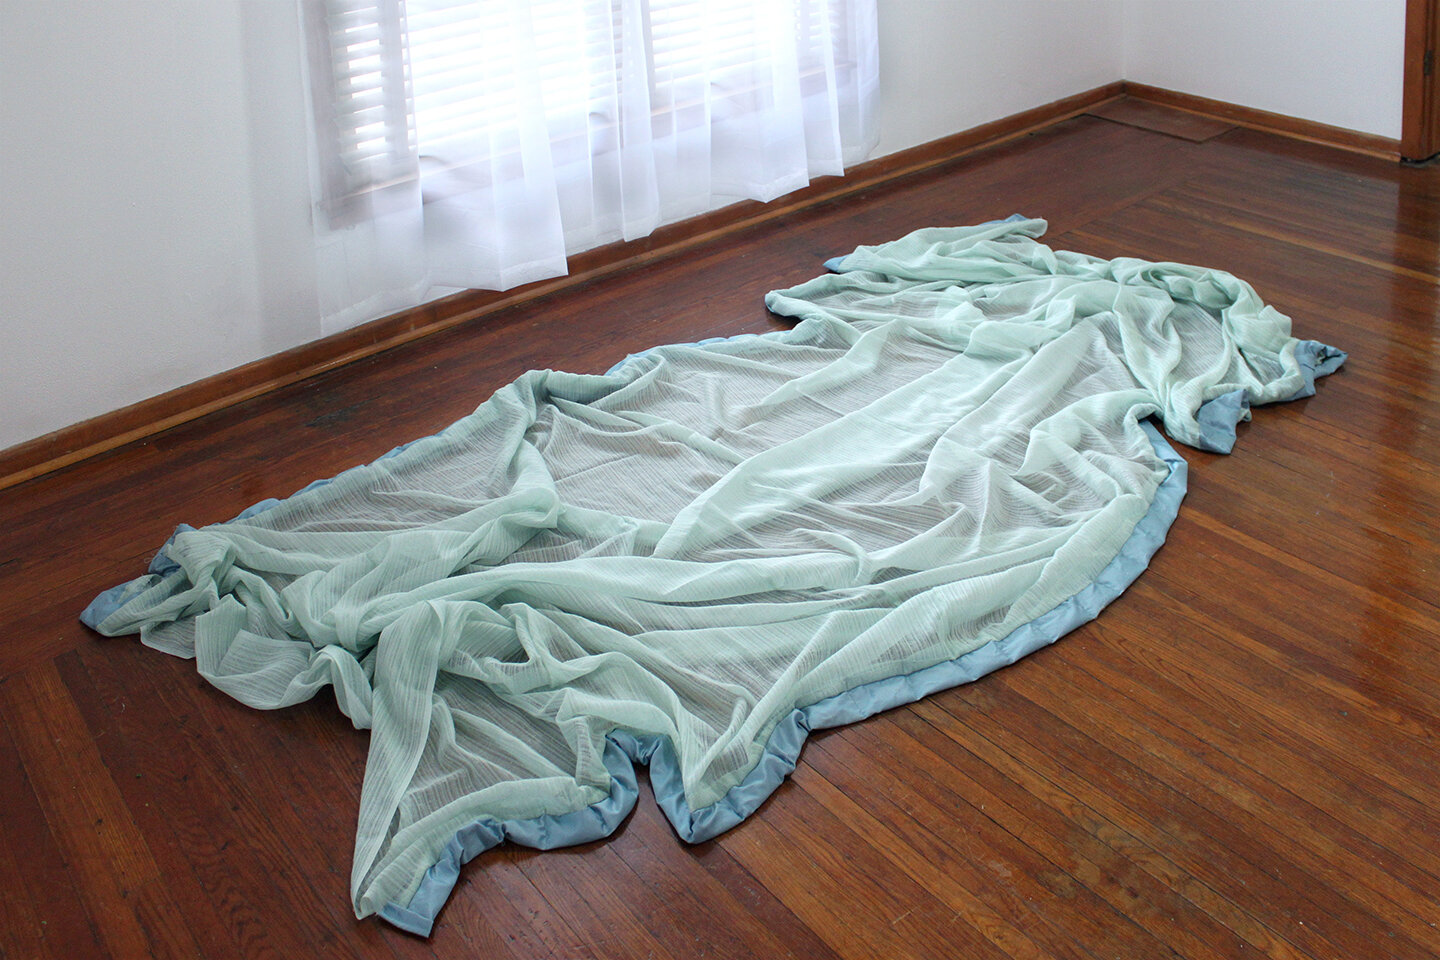  Cairus Larsen,  Vulnerability Blue  (fabric, rice) 2018/2019 *Pairs of people are invited to have a conversation under the blanket. 